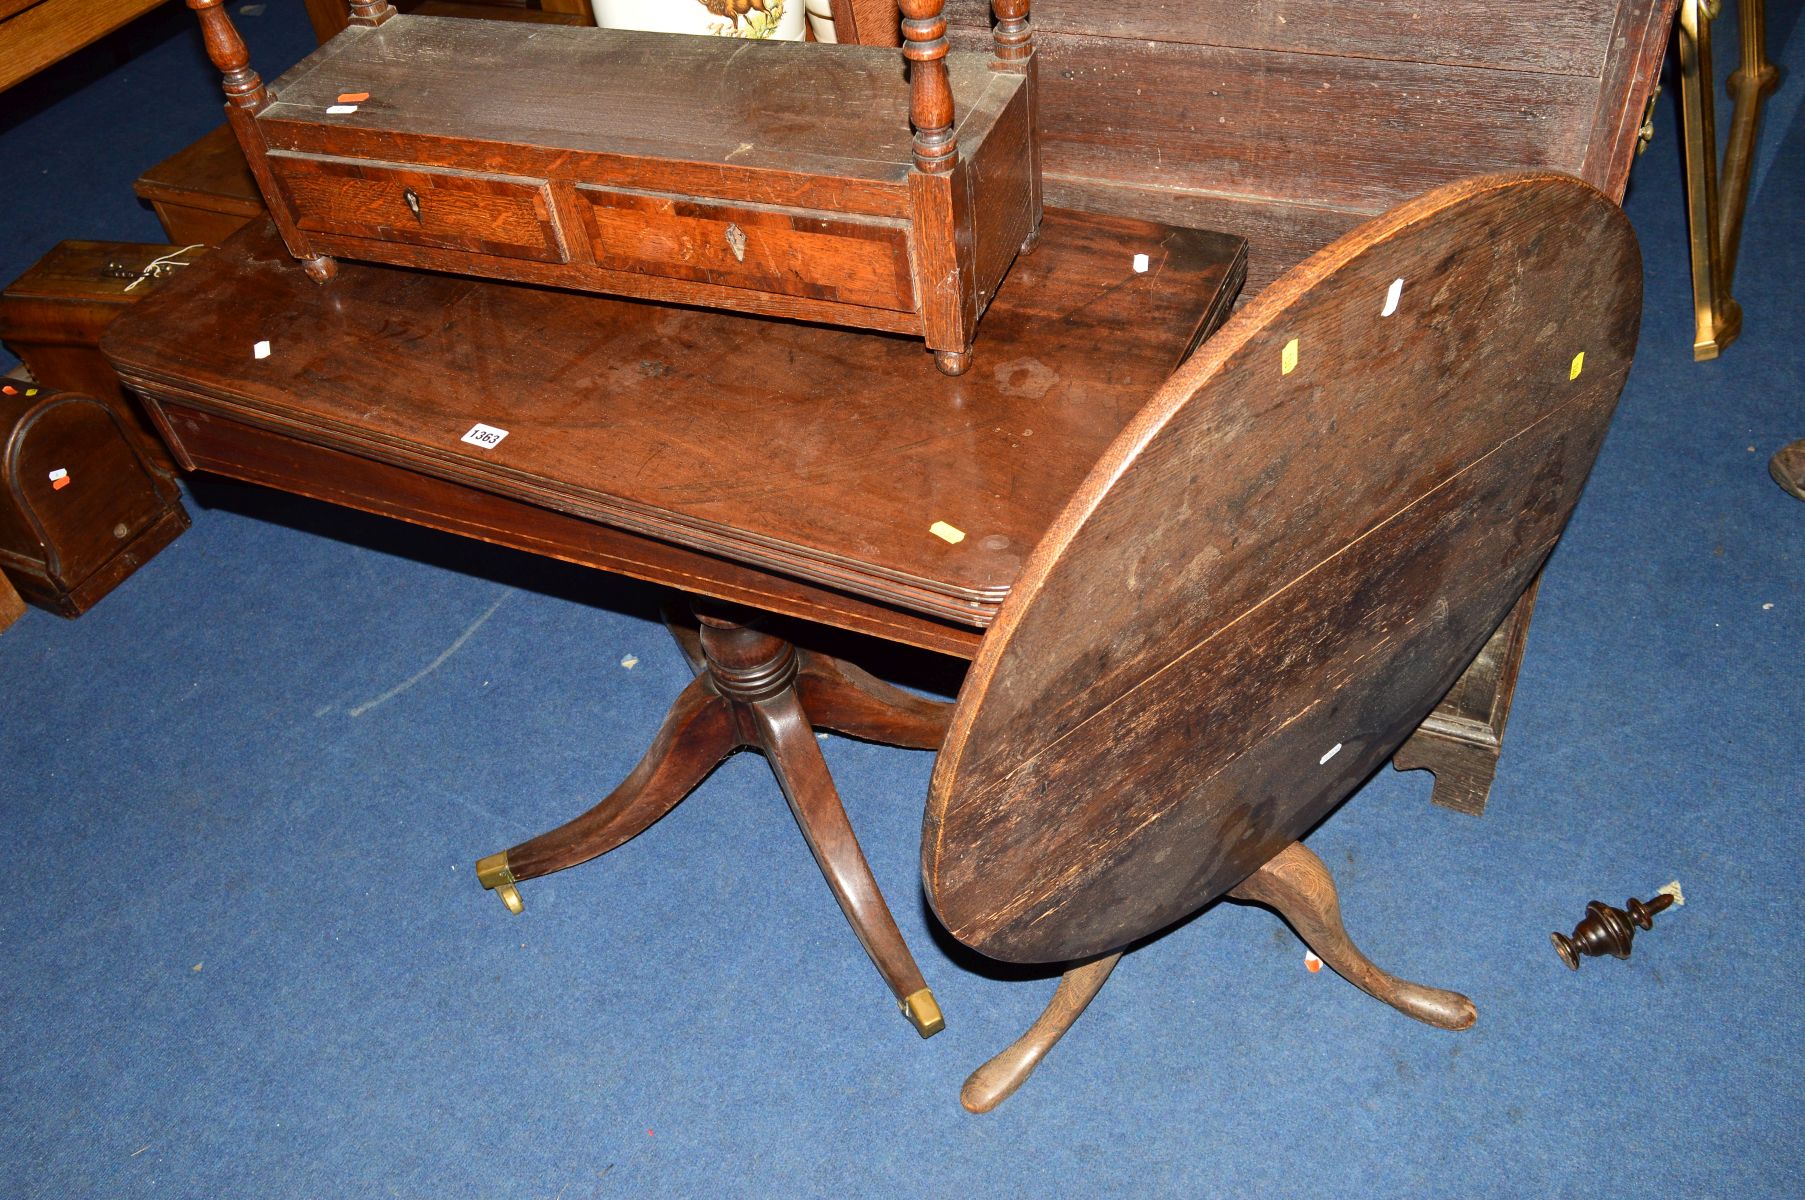 A GEORGIAN MAHOGANY FOLD OVER CARD TABLE, on a pedestal base with brass caps and casters, together